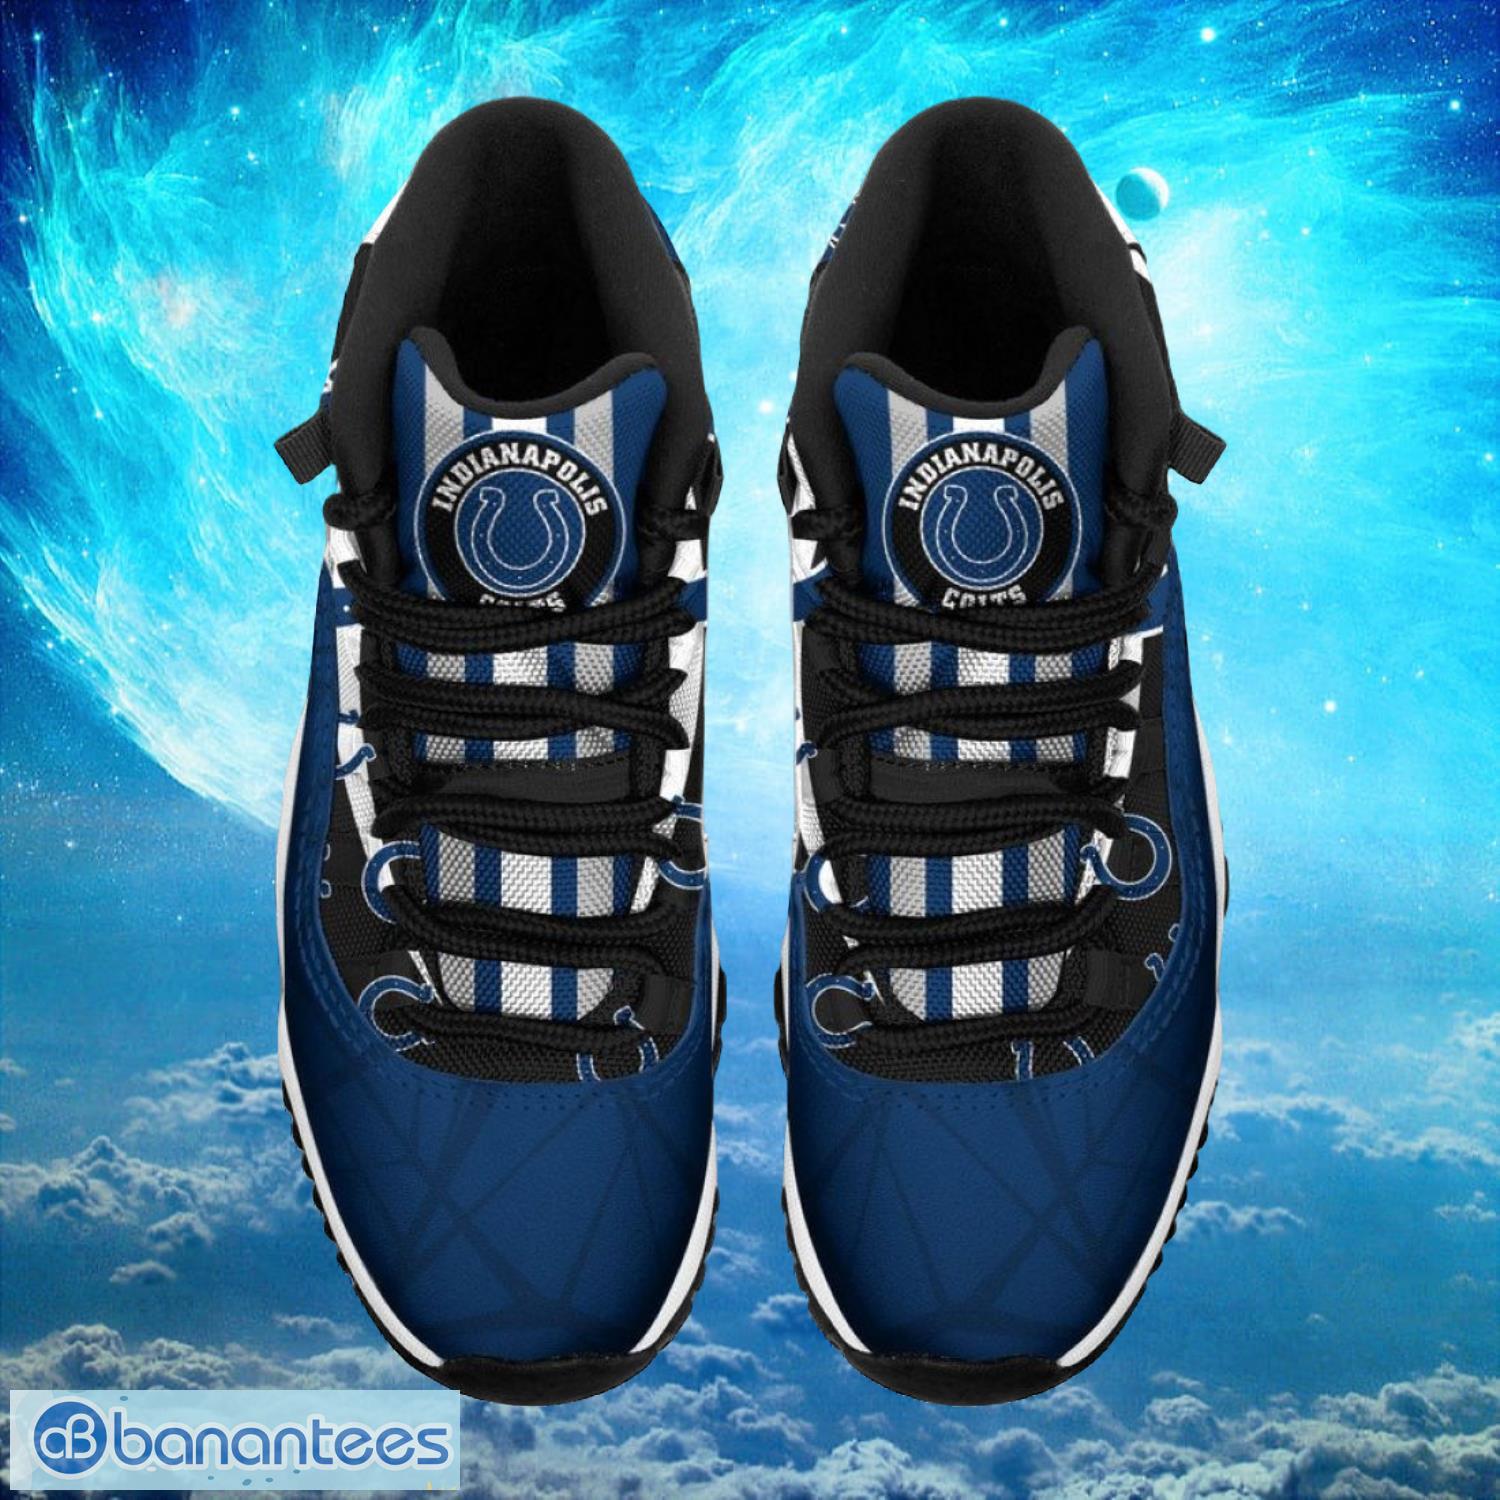 Indianapolis Colts NFL Air Jordan 11 Sneakers Shoes Gift For Fans Product Photo 2